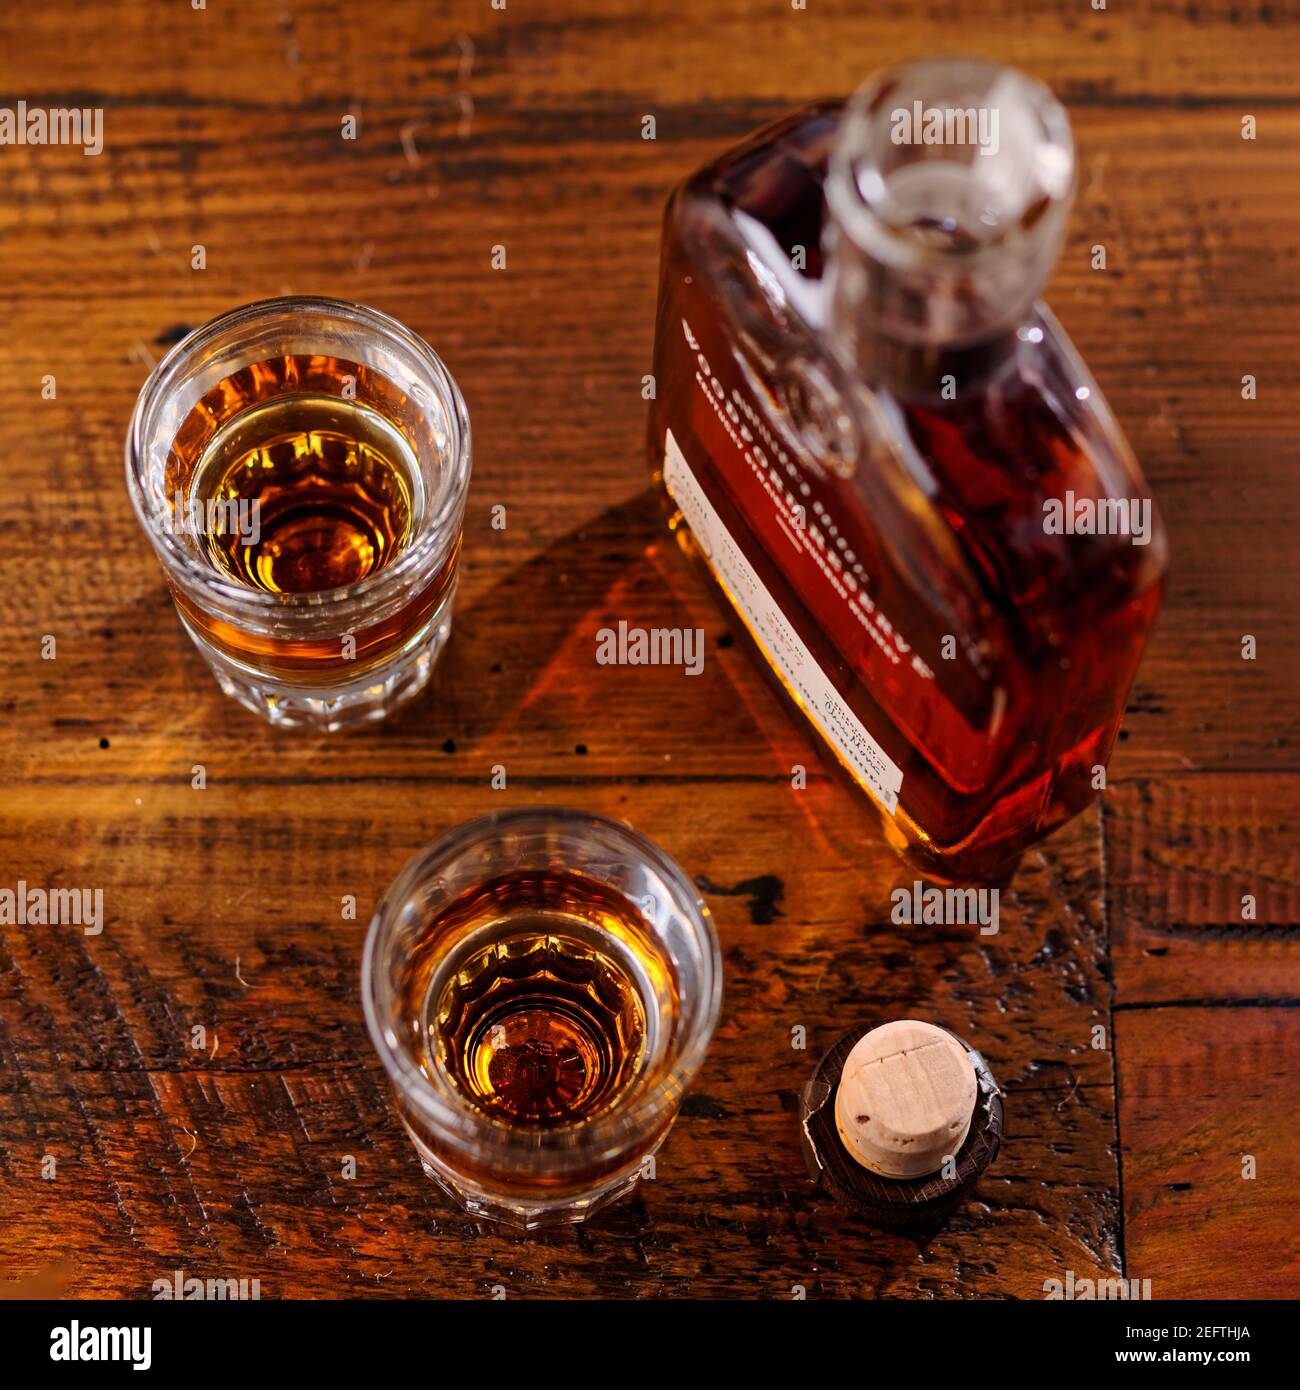 Small bootle of Kentucky Strtaight Bourbon Whiskey with Shot Glasses on a Rustic Wooden Table Stock Photo